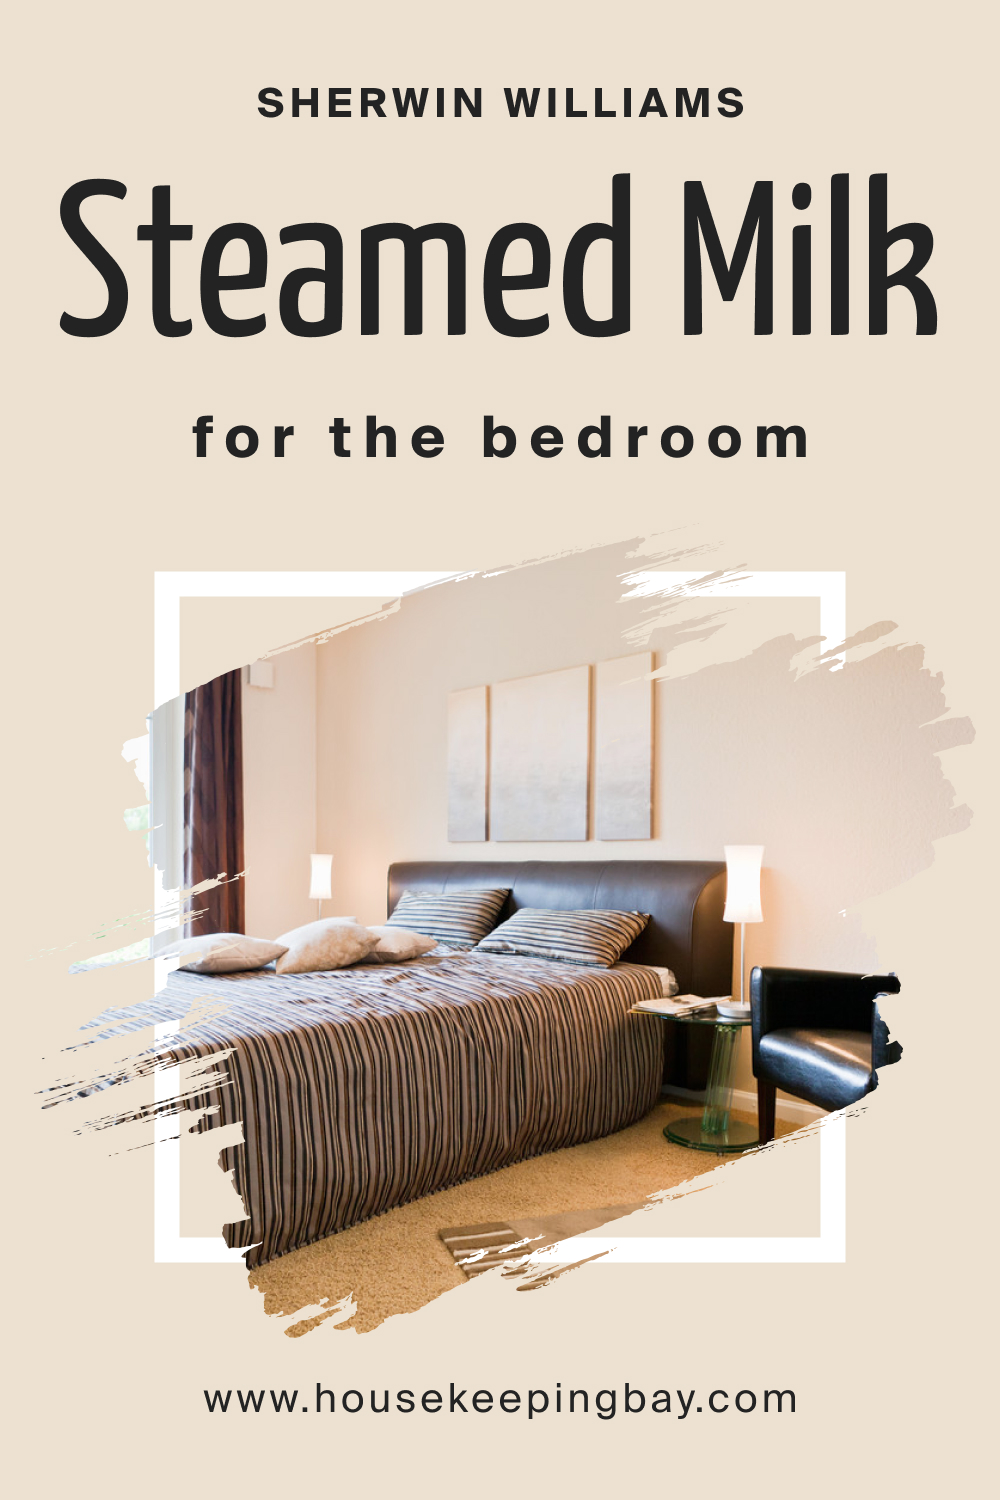 Sherwin Williams. SW Steamed Milk For the bedroom